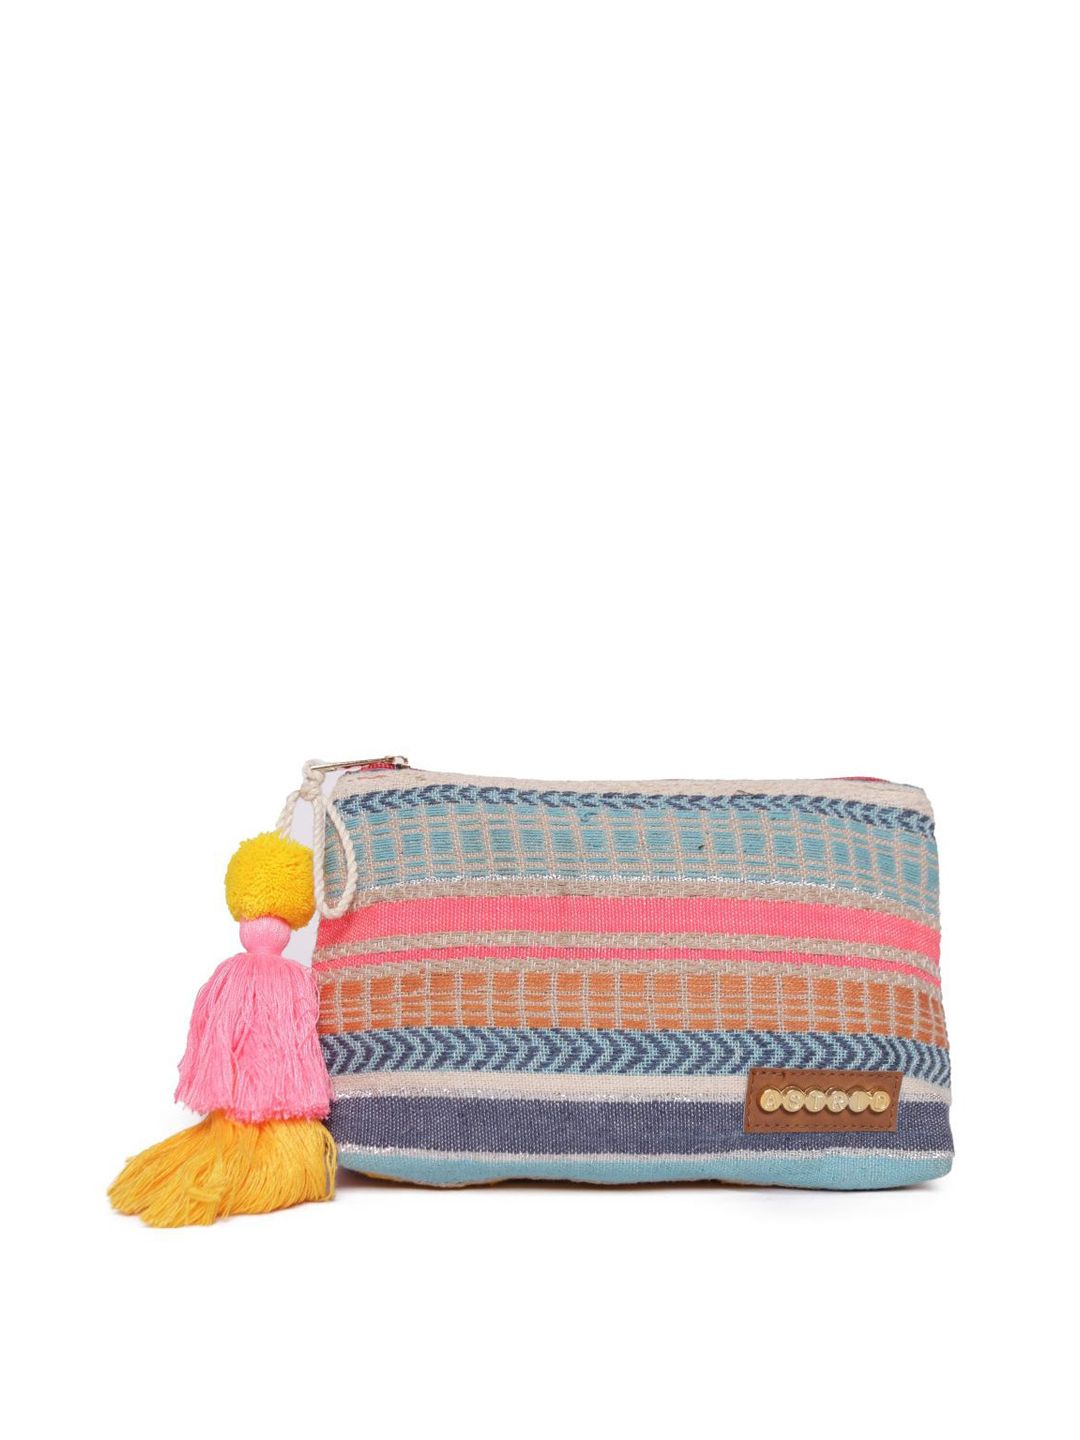 ASTRID Green & Pink Woven Design Travel Pouch With Tassels Price in India